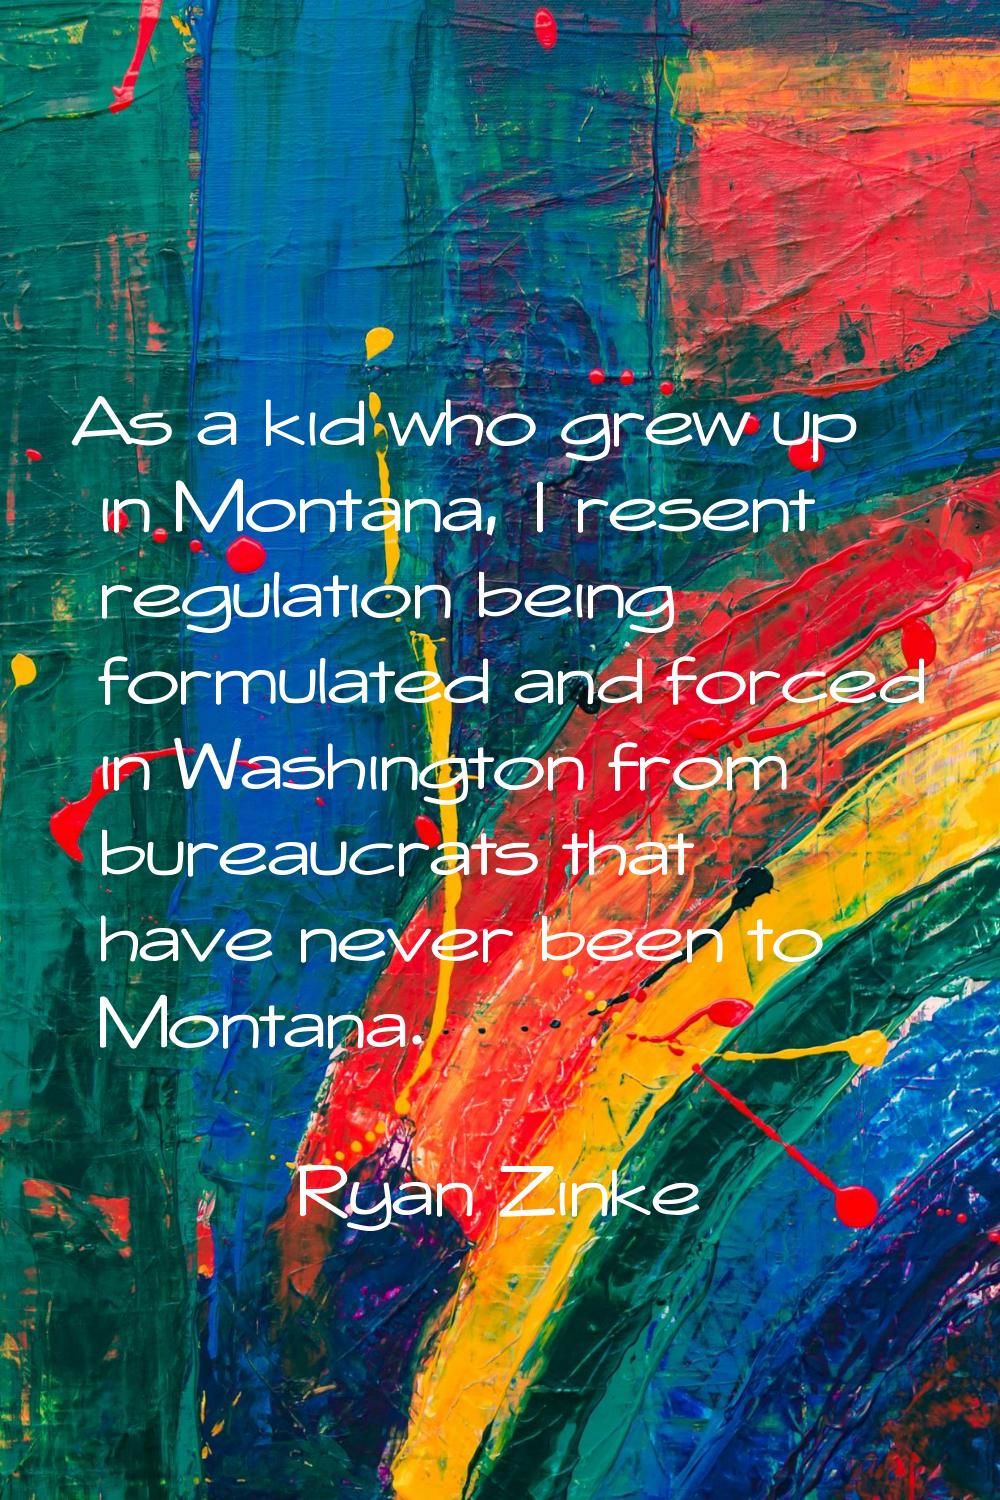 As a kid who grew up in Montana, I resent regulation being formulated and forced in Washington from